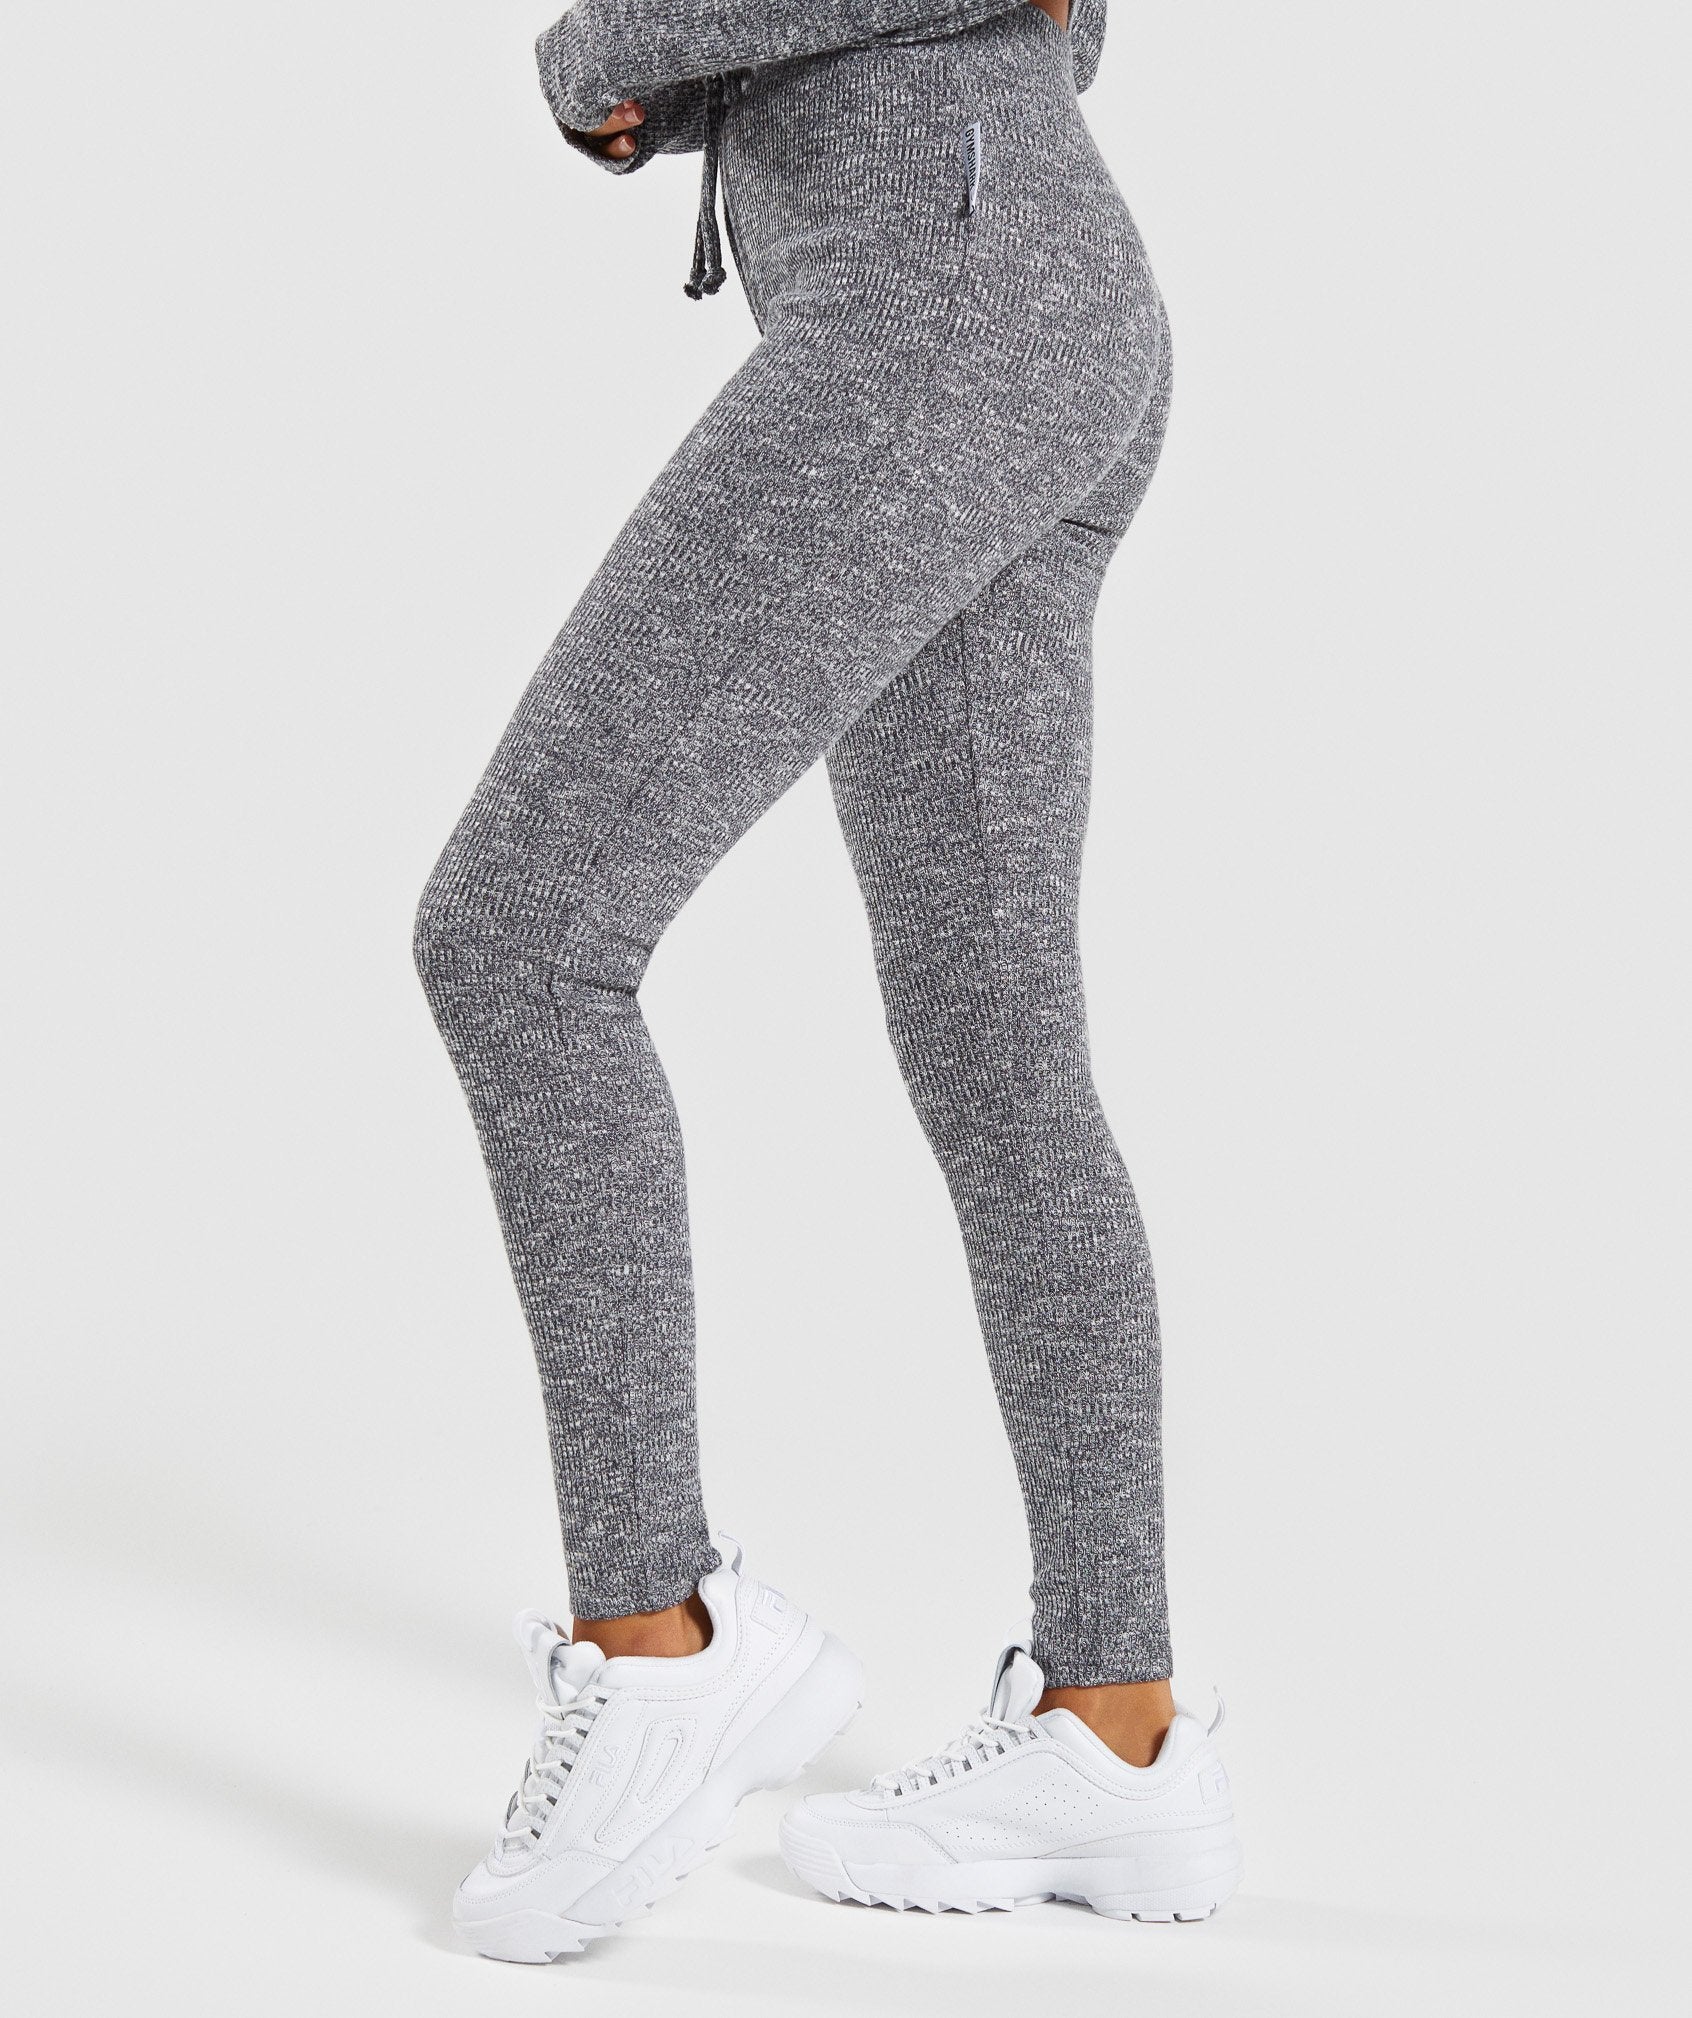 Slounge Leggings in Charcoal Marl - view 3